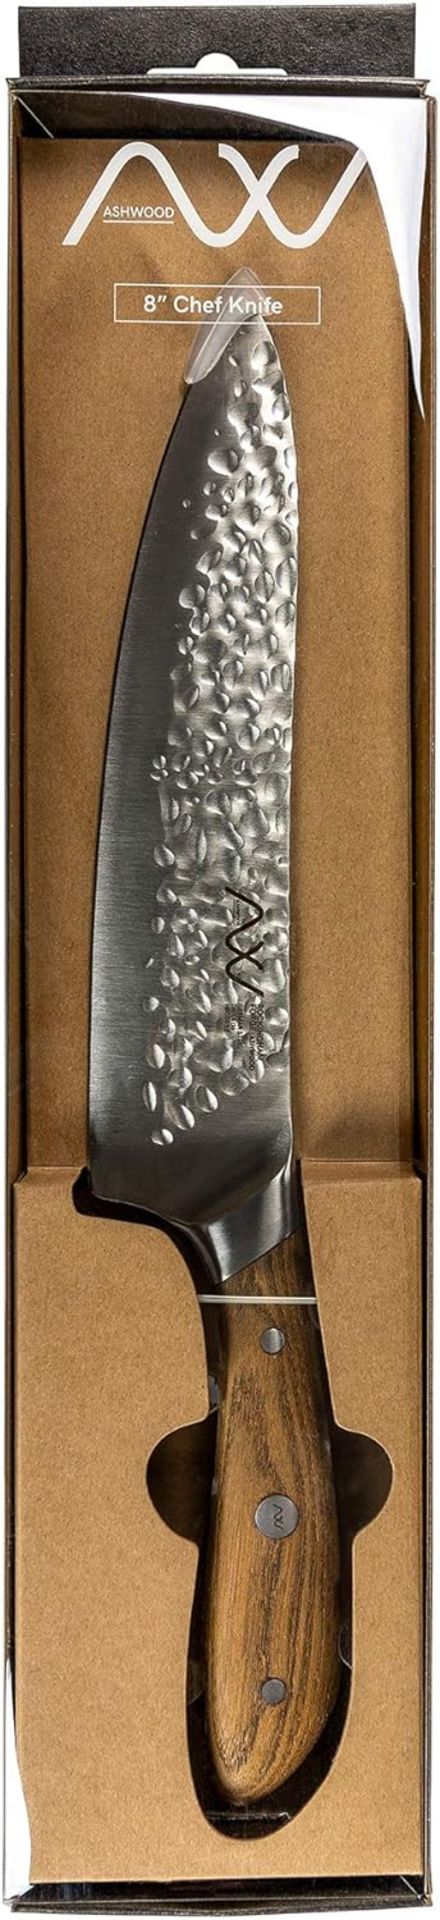 1 Pallet (695 Pieces) of Rockingham Forge Ashwood Series 8” Chef Knife RRP £19425 - Image 3 of 5